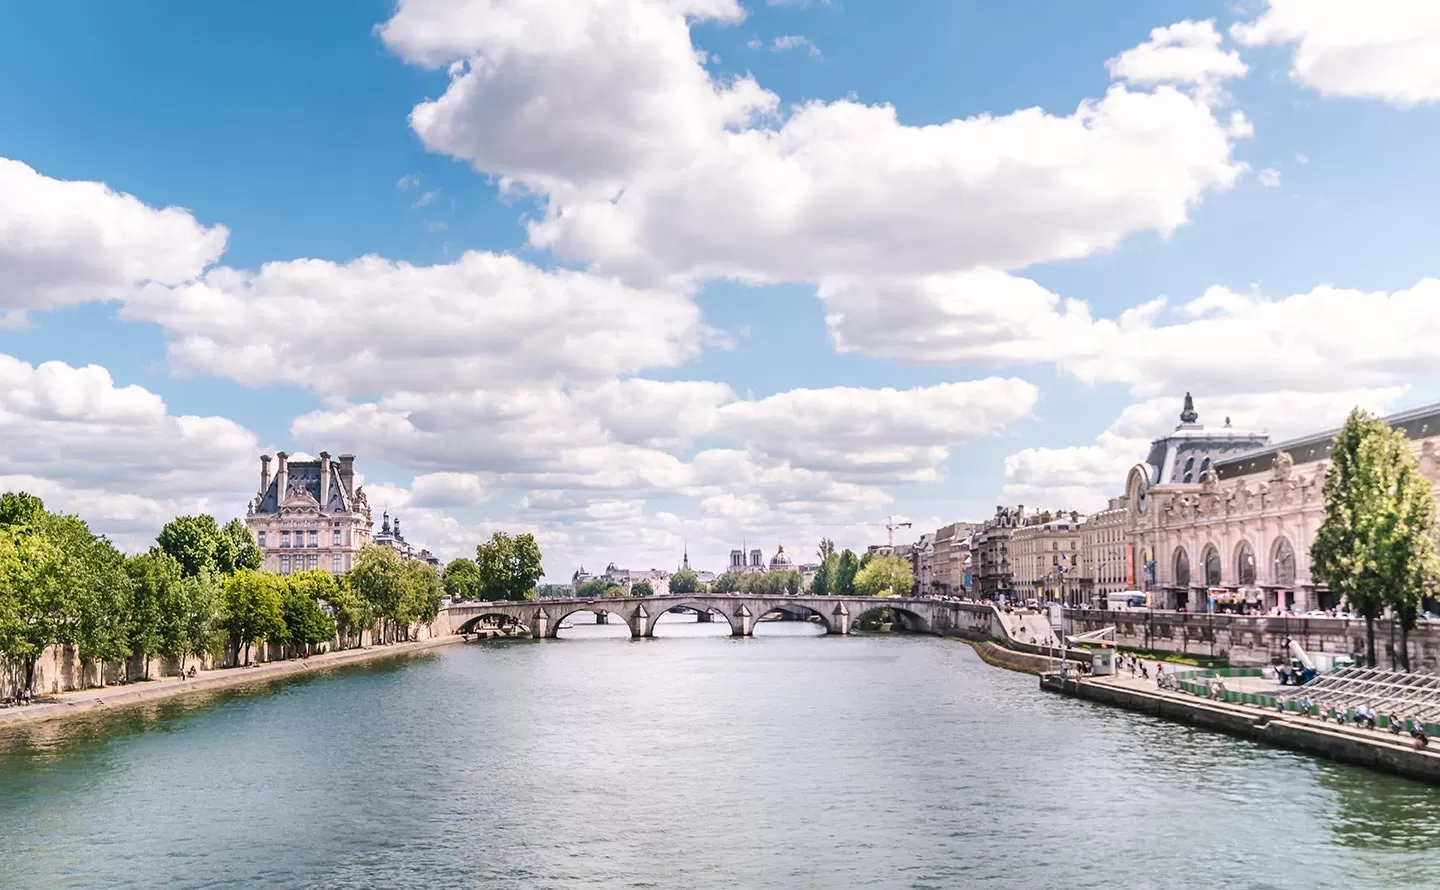 paris itinerary 4 days - what to do in paris in 4 days - cruise down the seine river